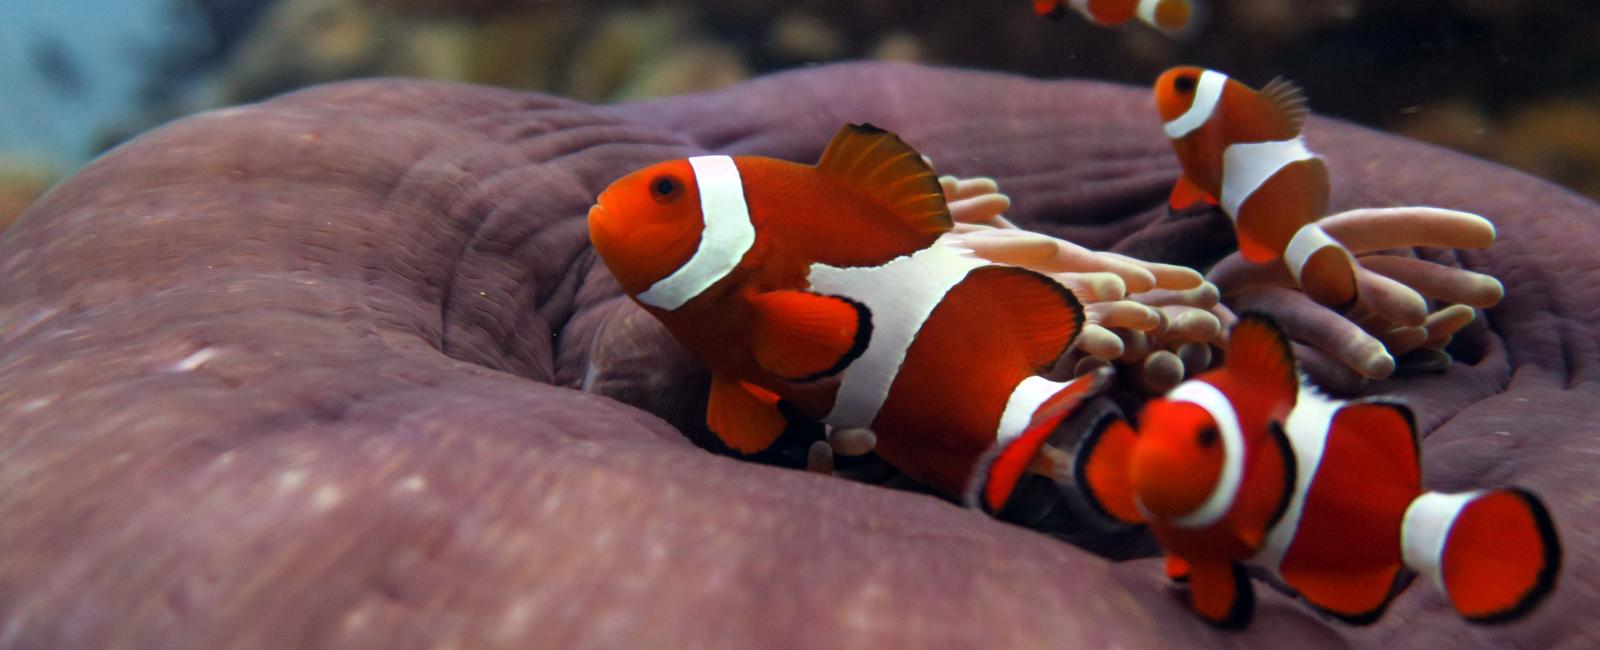 After the release of finding nemo in 2003 clown fish faced local extinction in areas where the fish breed and are collected for sale due to high demand in stores selling aquarium fish